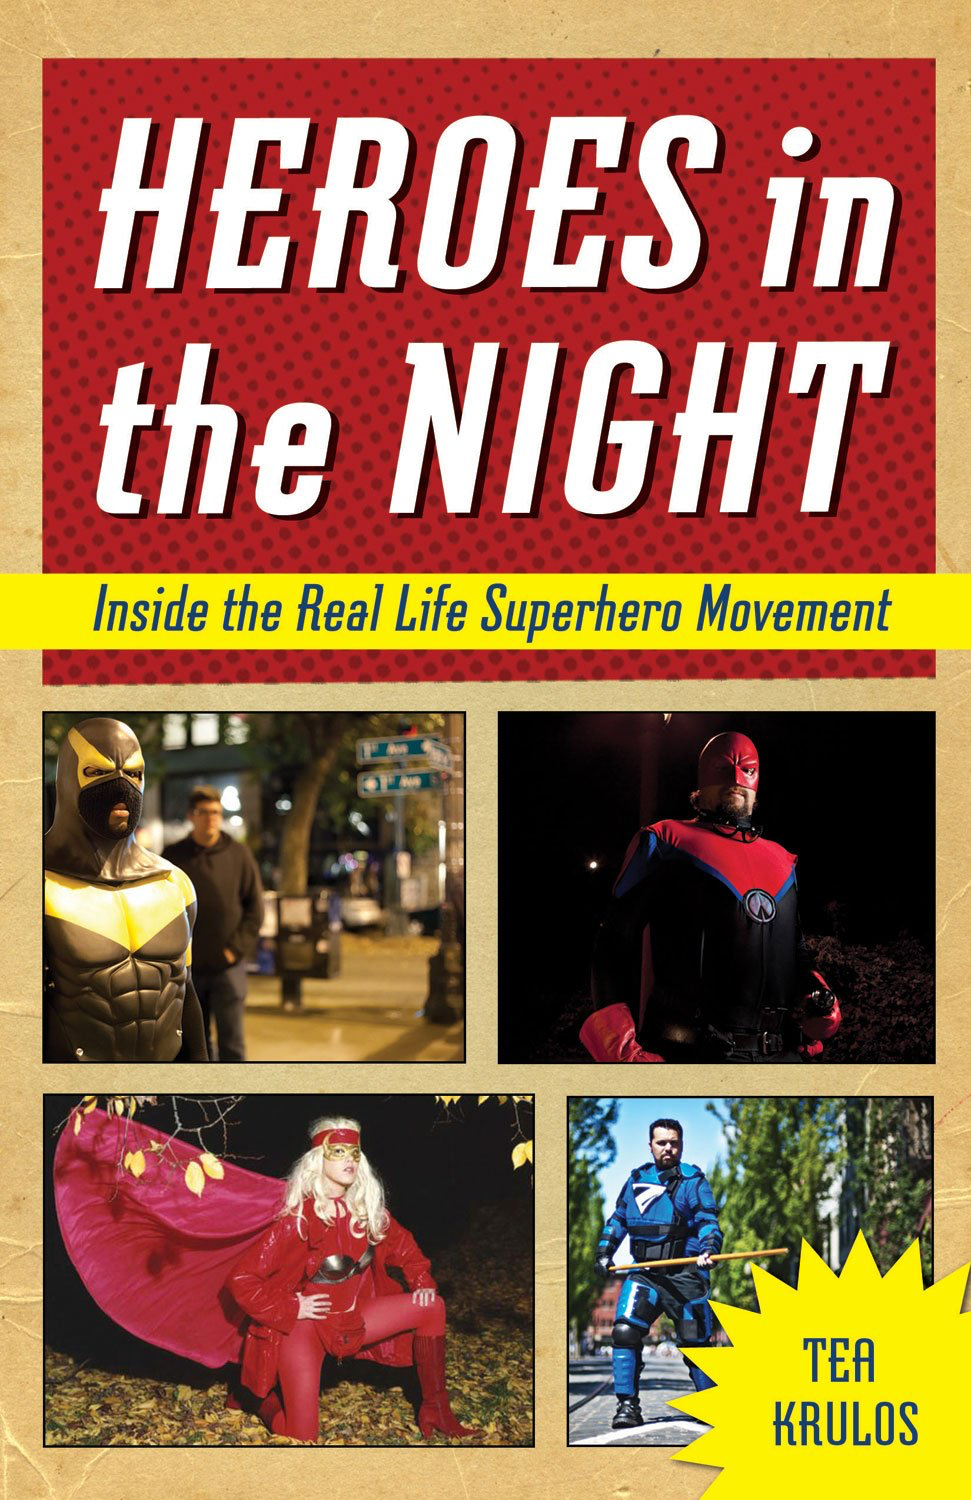 Heroes in the Night: Inside the Real Life Superhero Movement